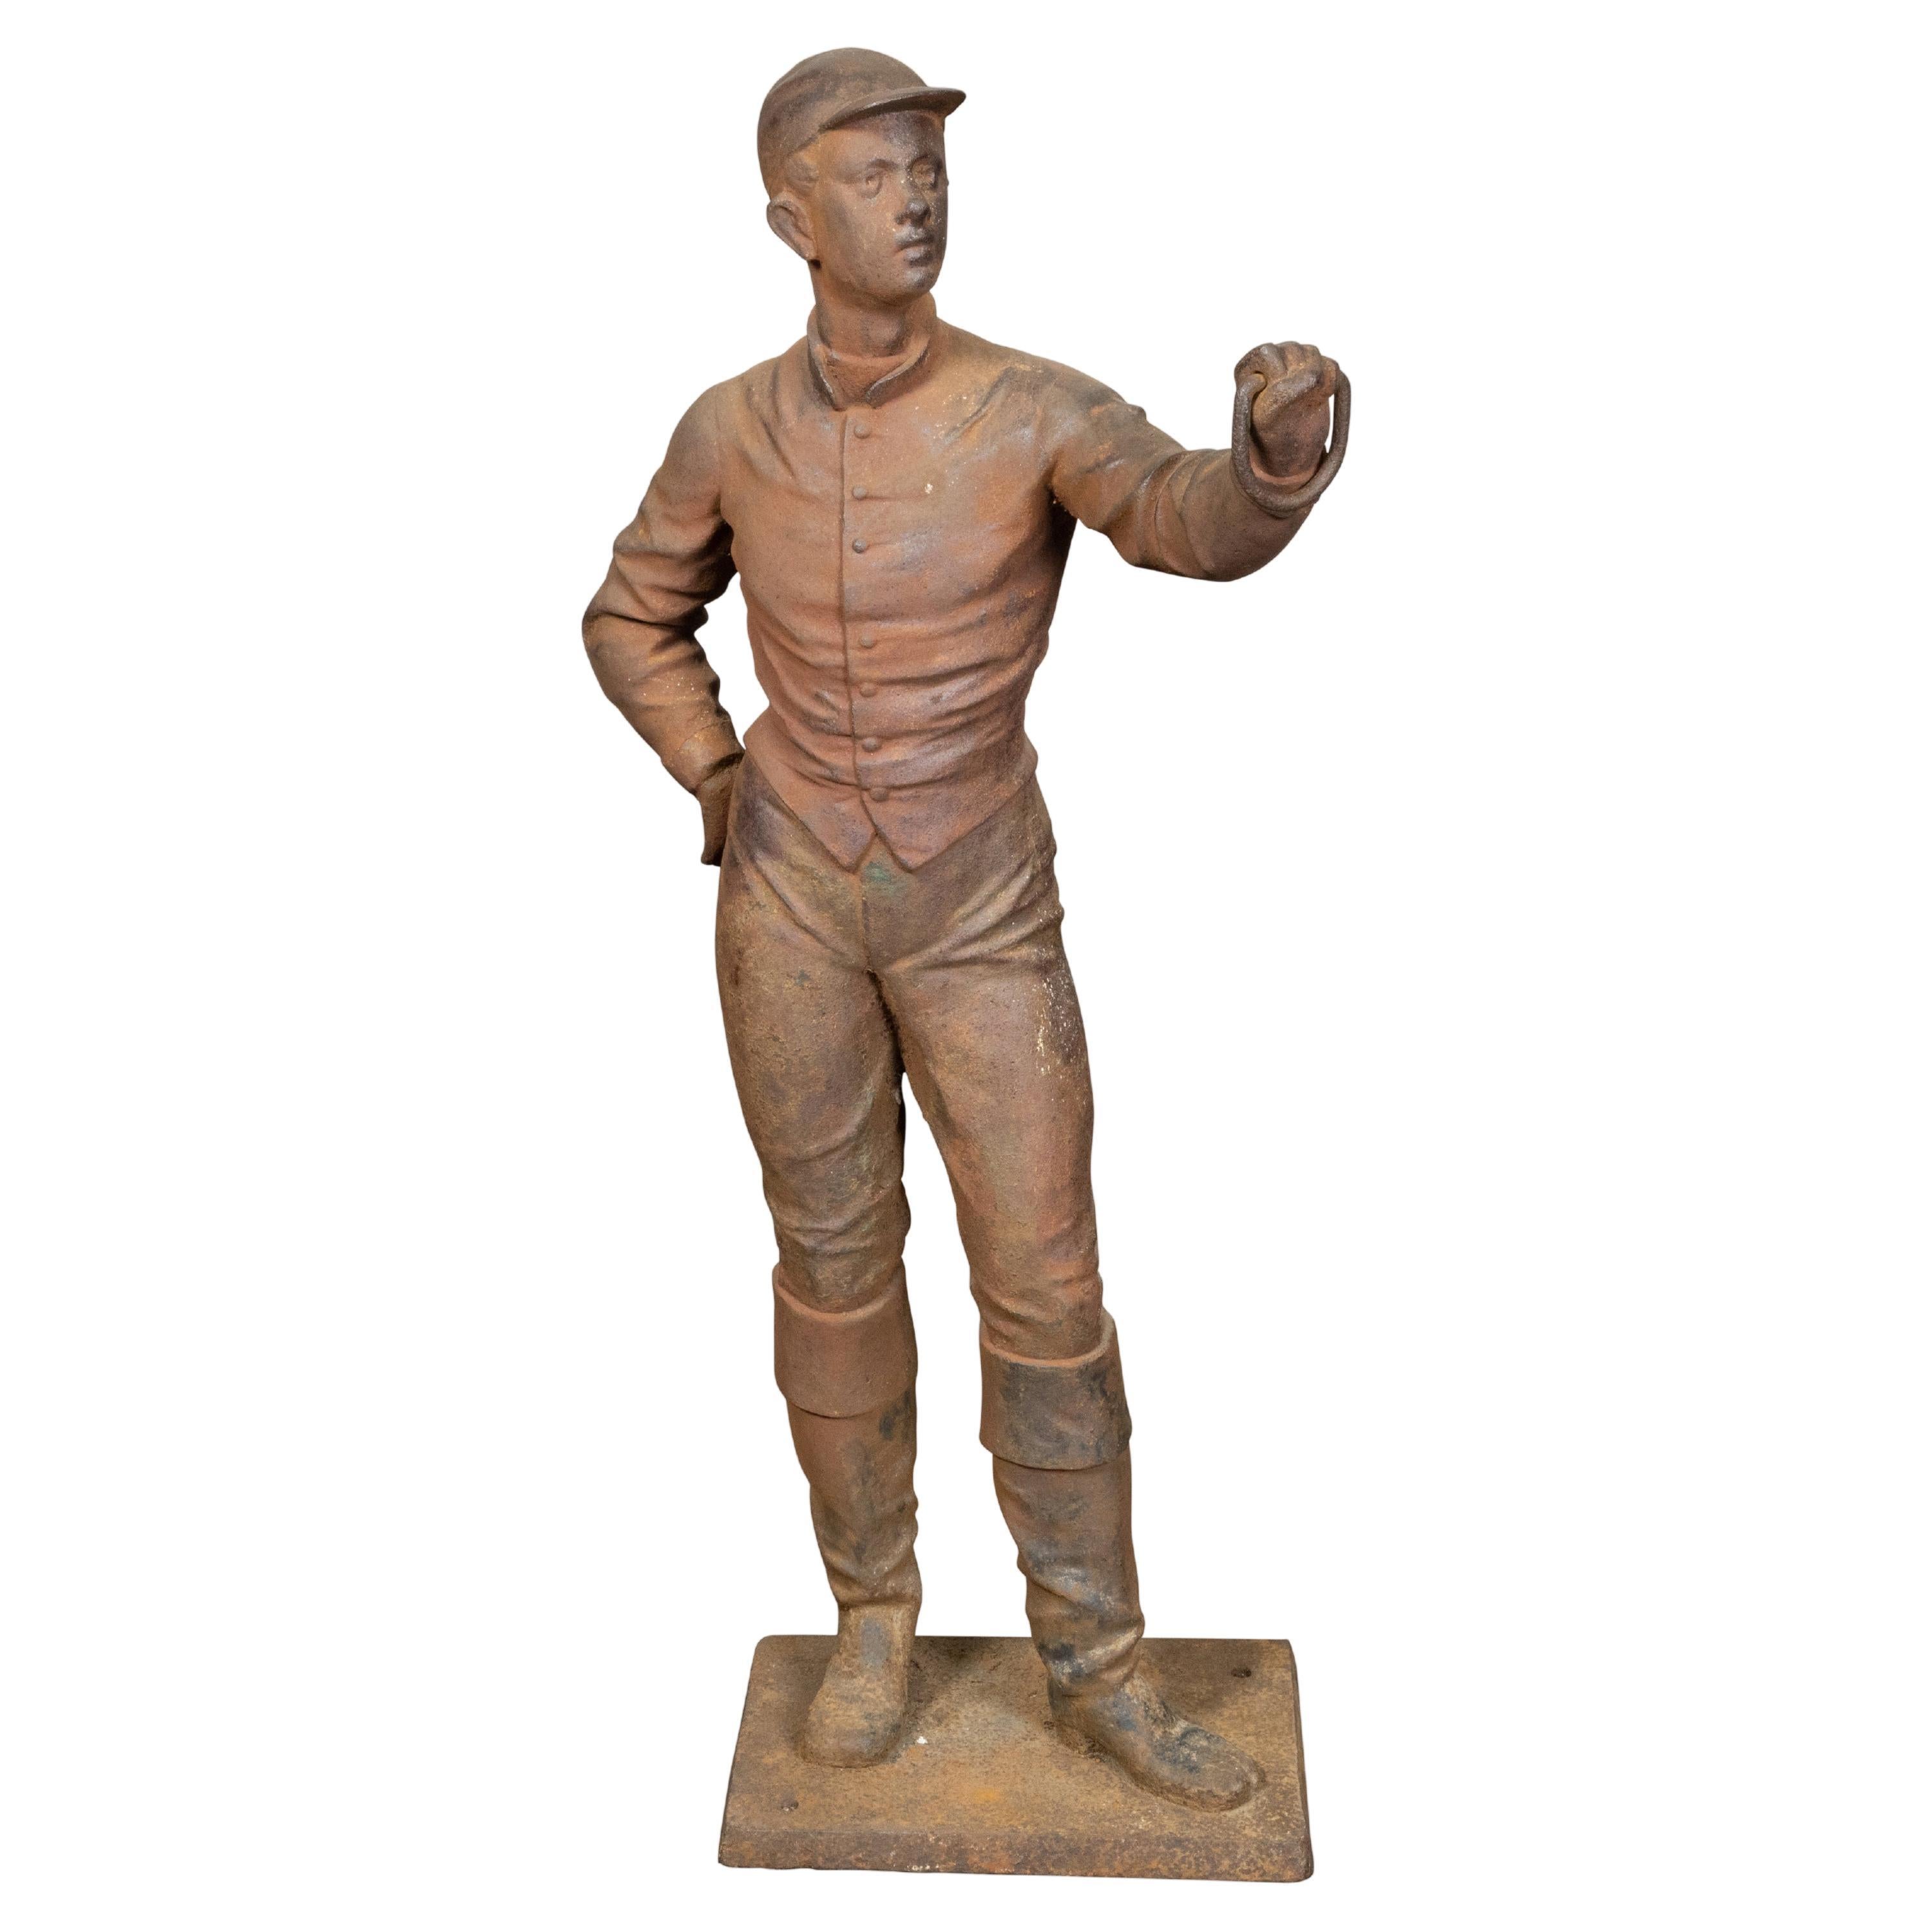 English Turn of the Century Iron Sculpture of a Jockey with Weathered Patina